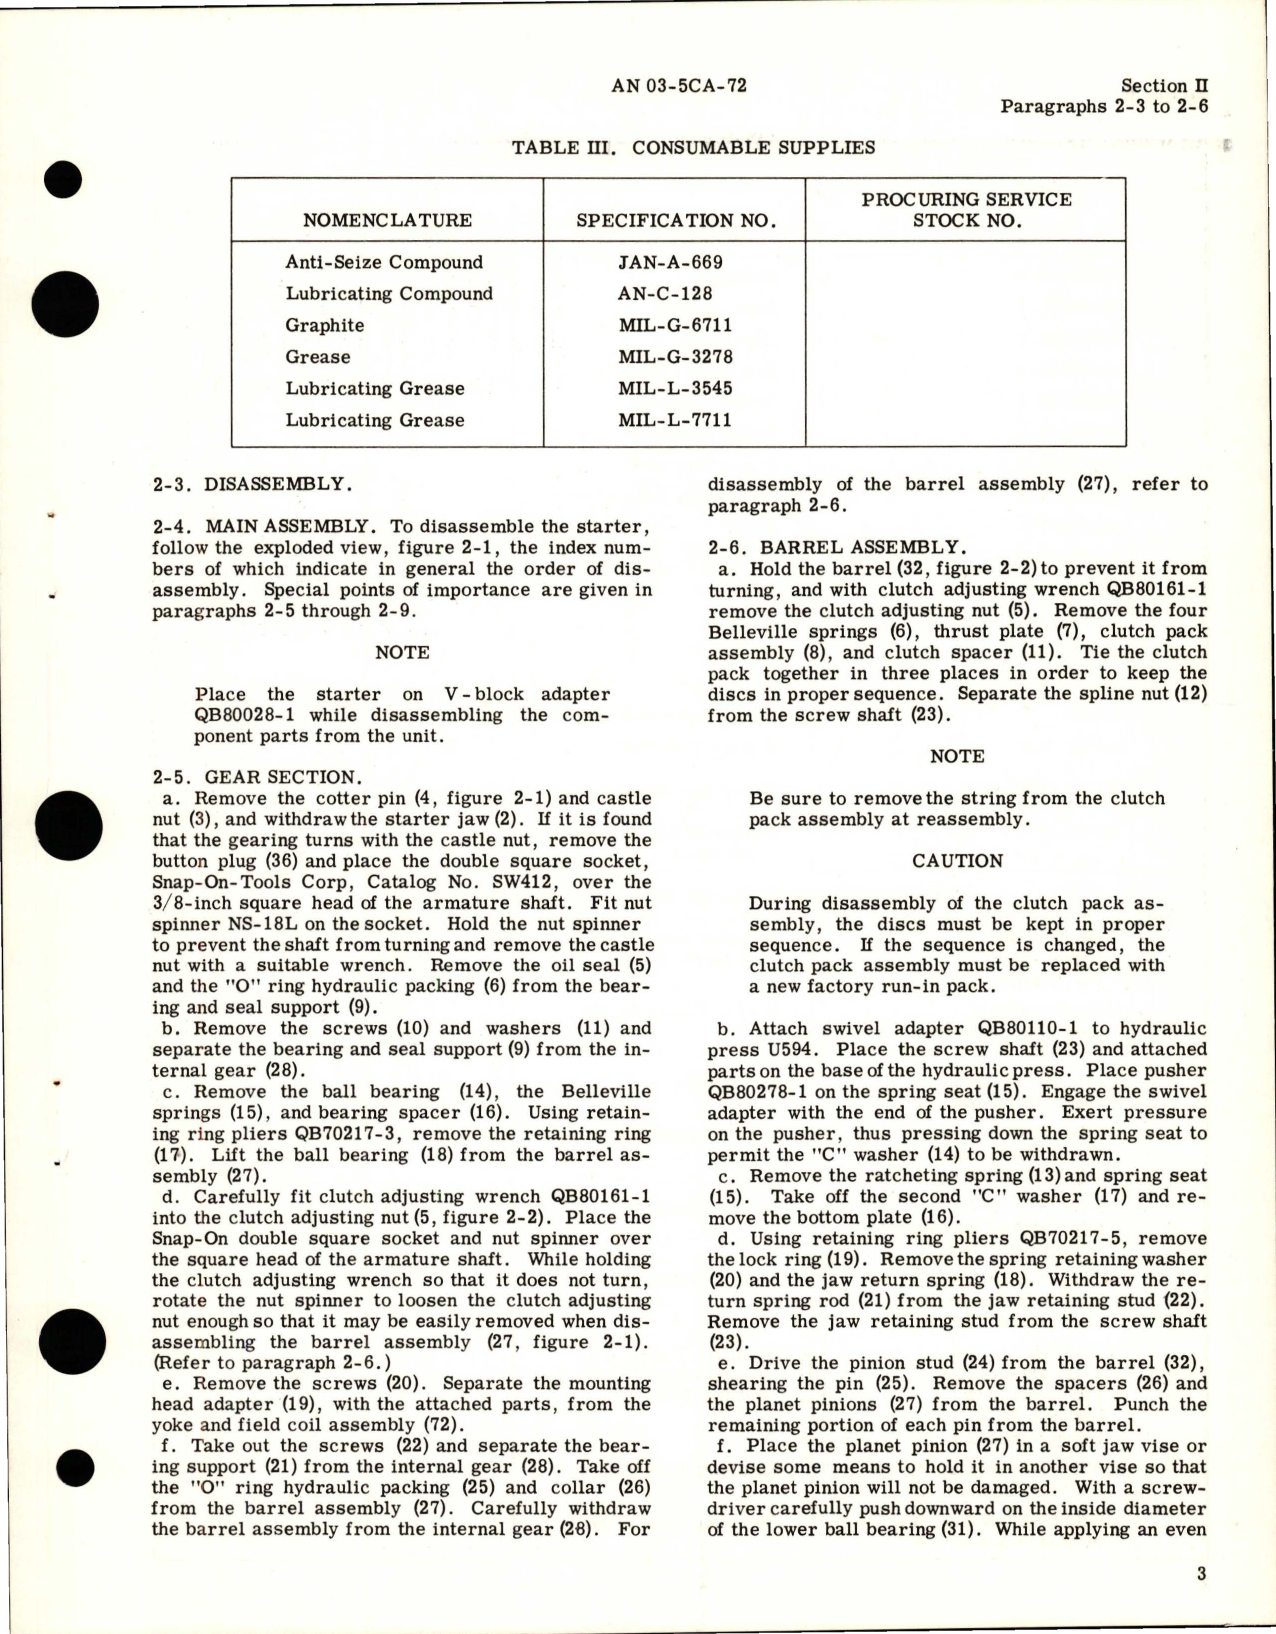 Sample page 7 from AirCorps Library document: Overhaul Instructions for Starters 